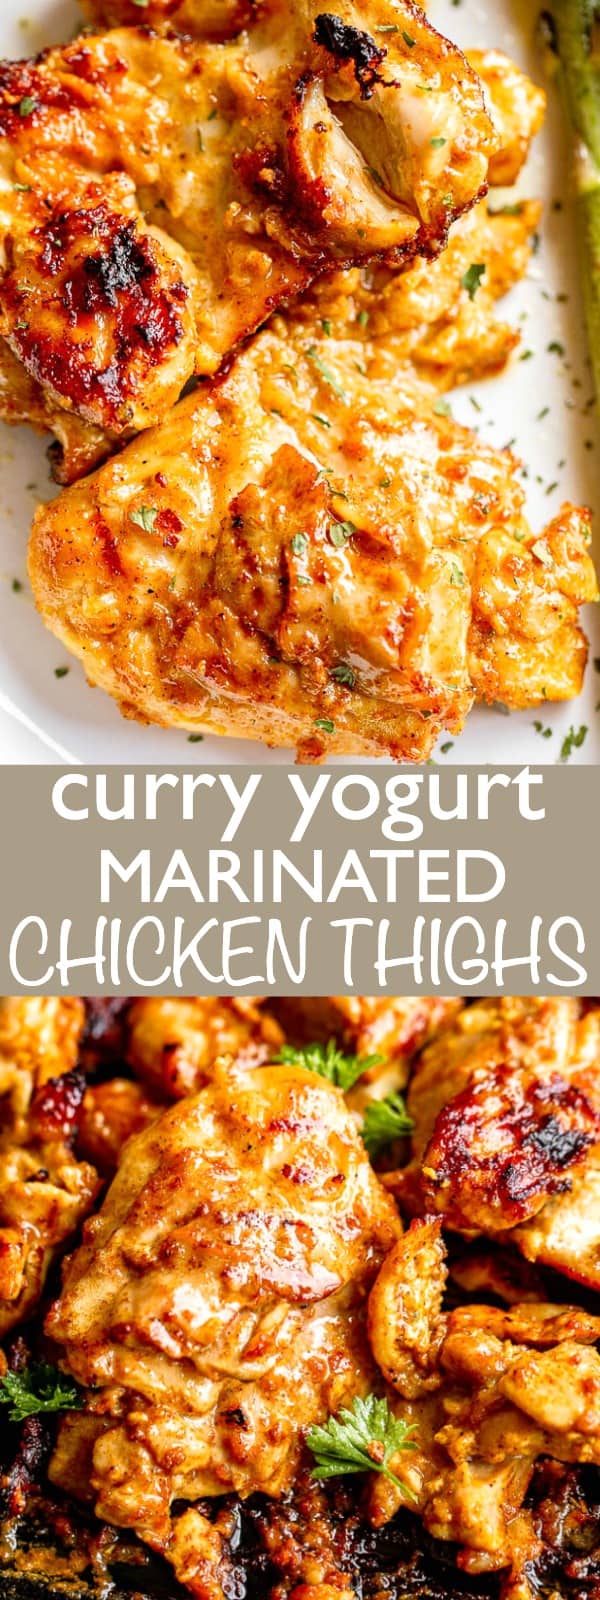 Marinated Chicken Thighs with Indian-Inspired Flavors